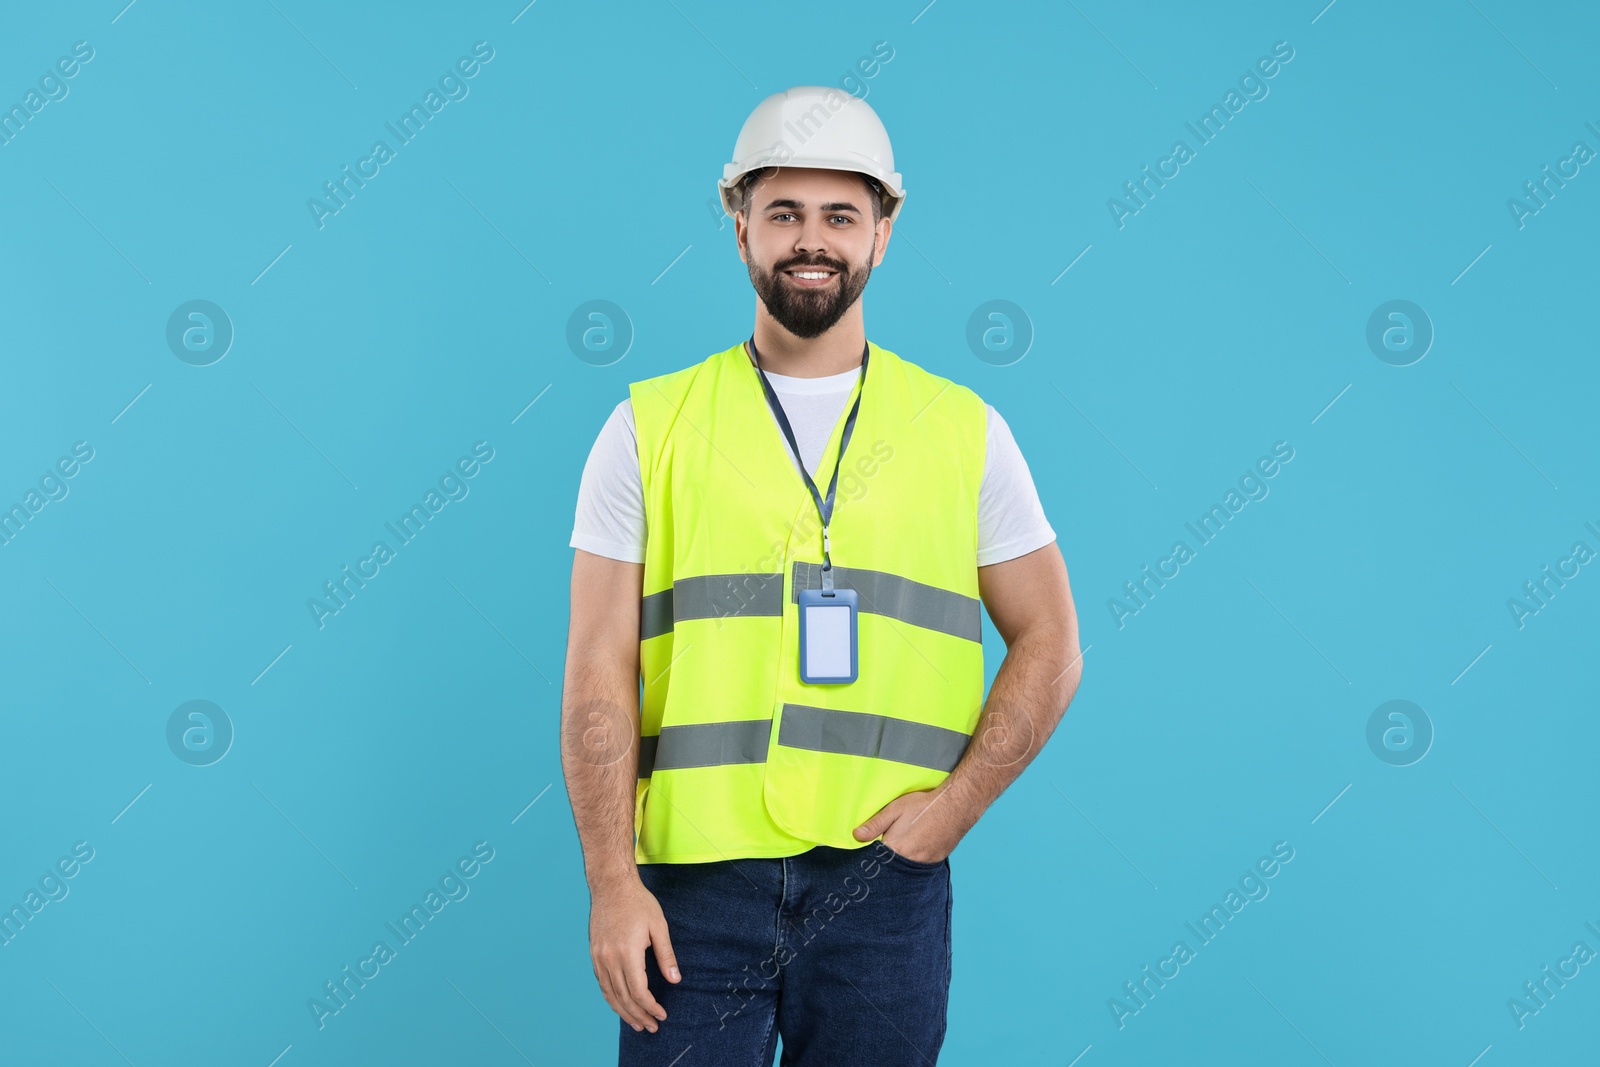 Photo of Engineer with hard hat and badge on light blue background